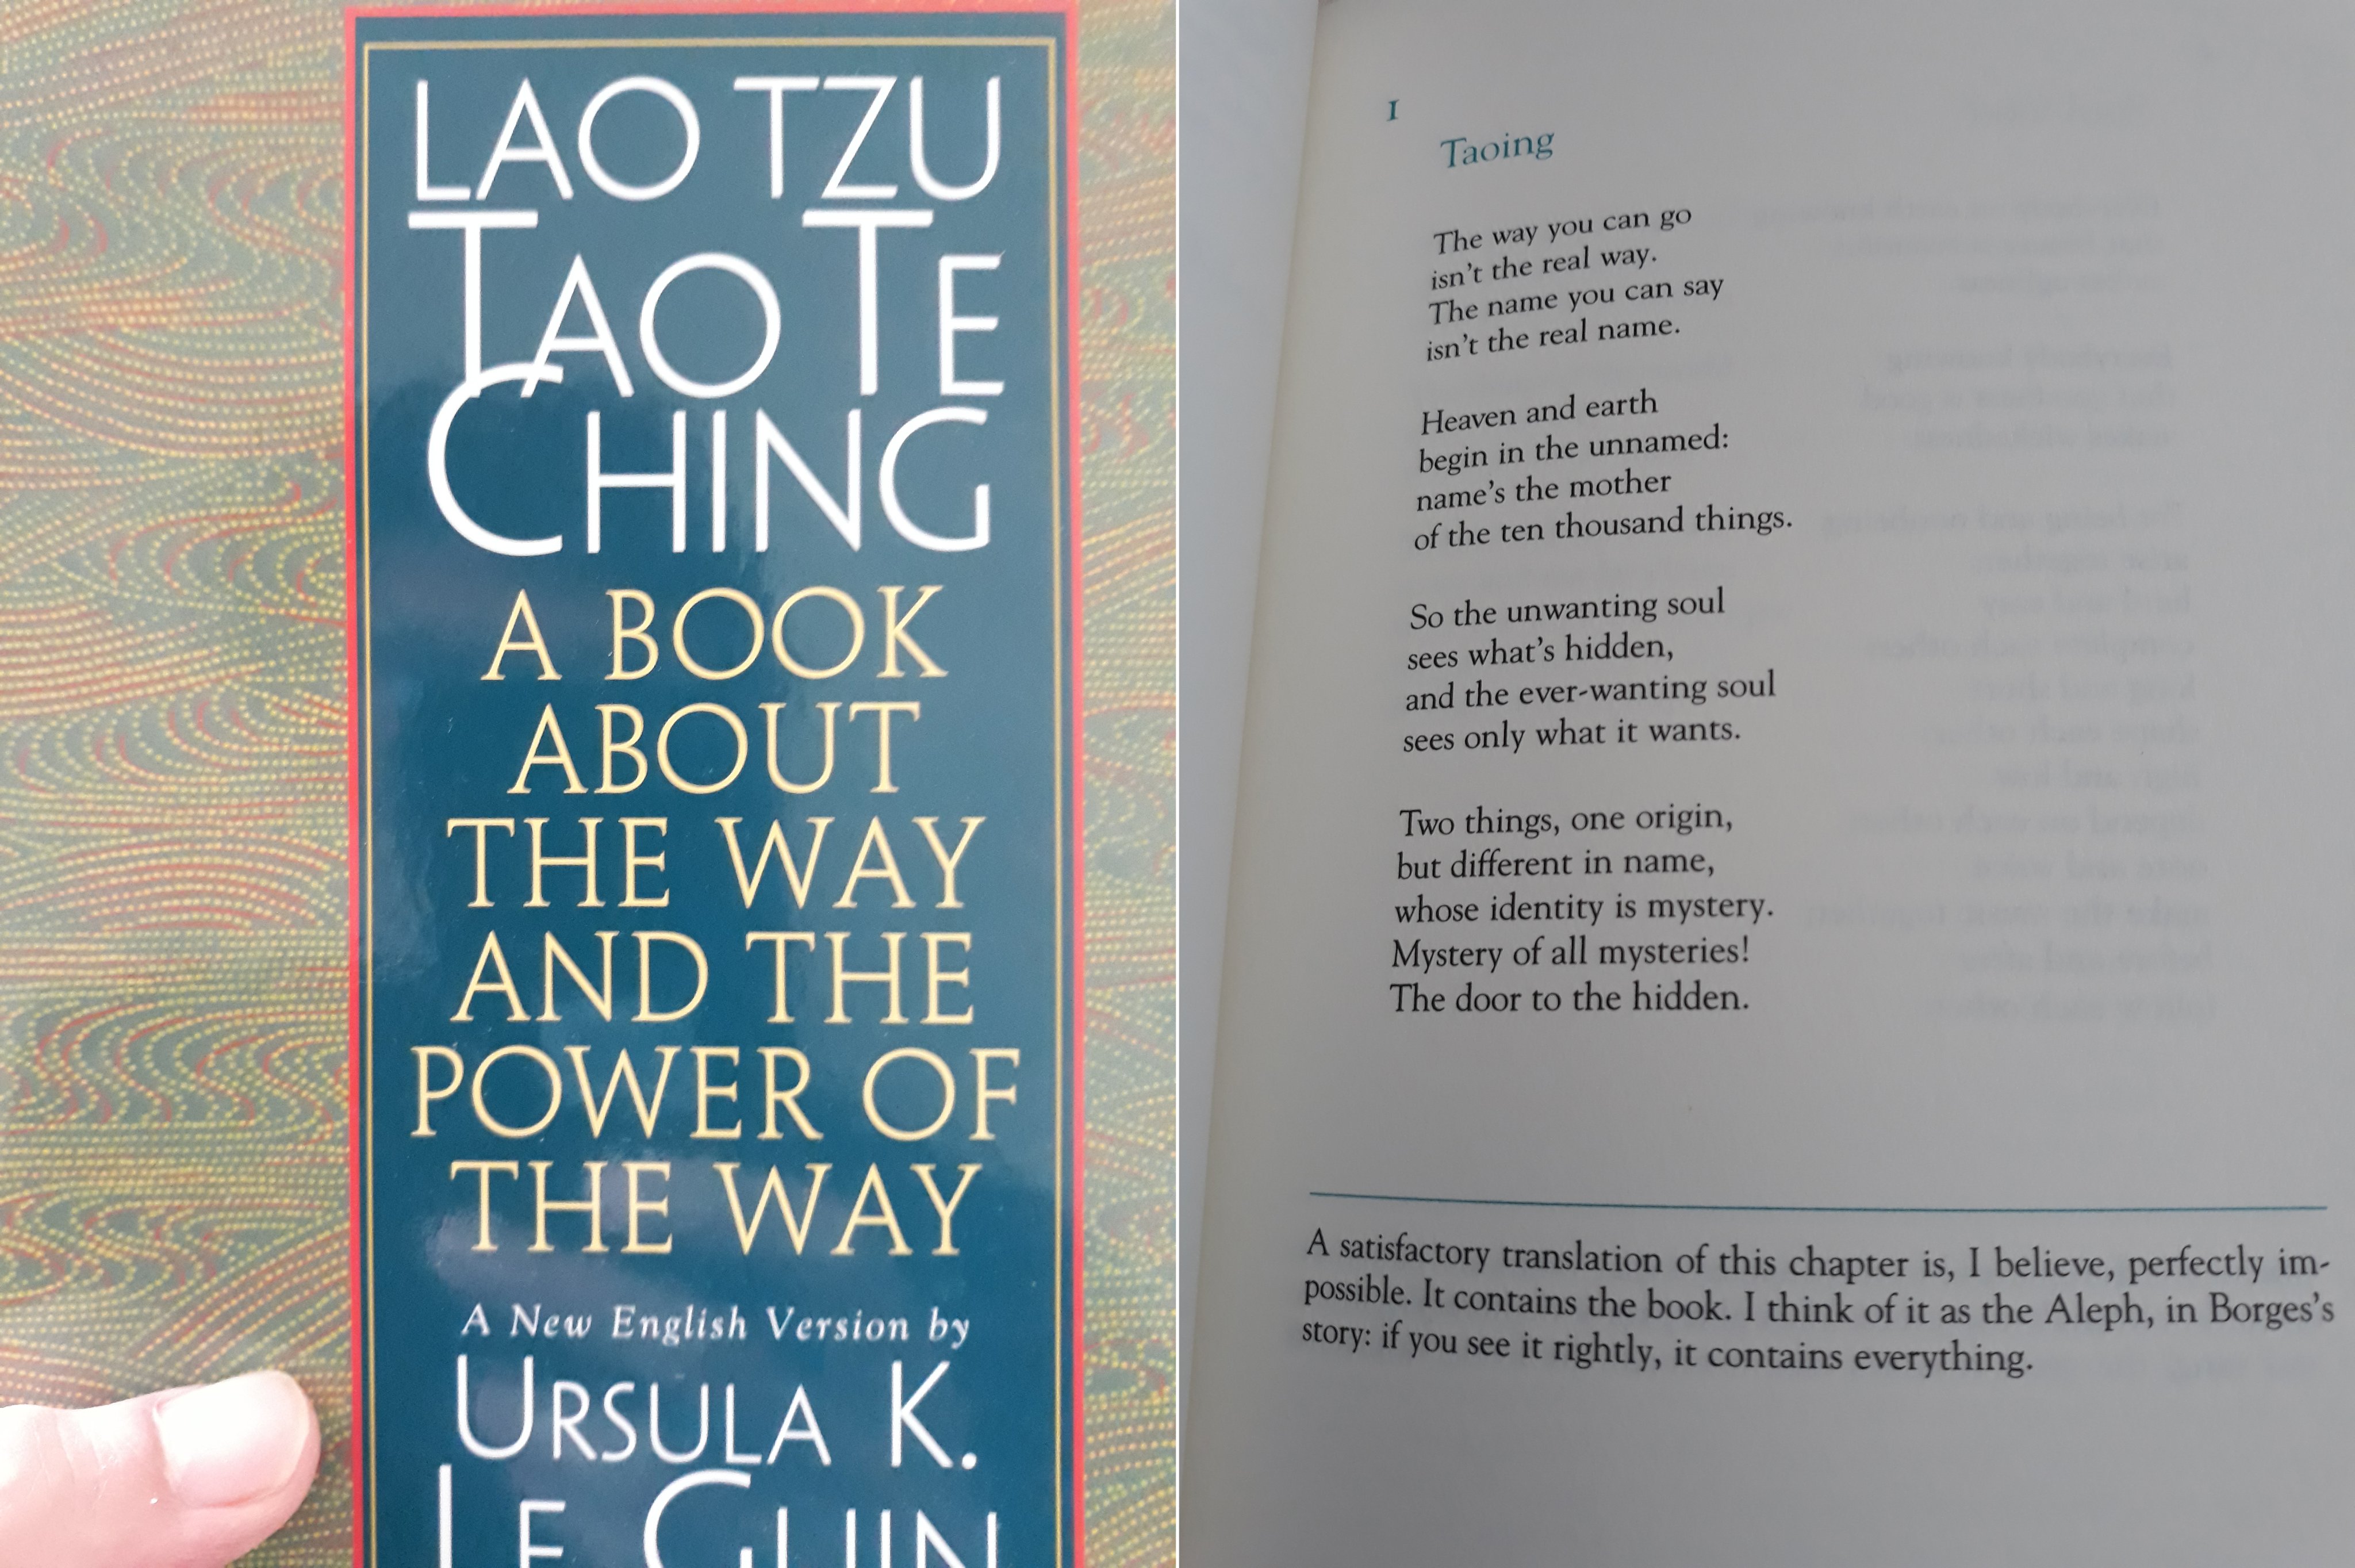 Translations of the Tao Te Ching: What Not to Read